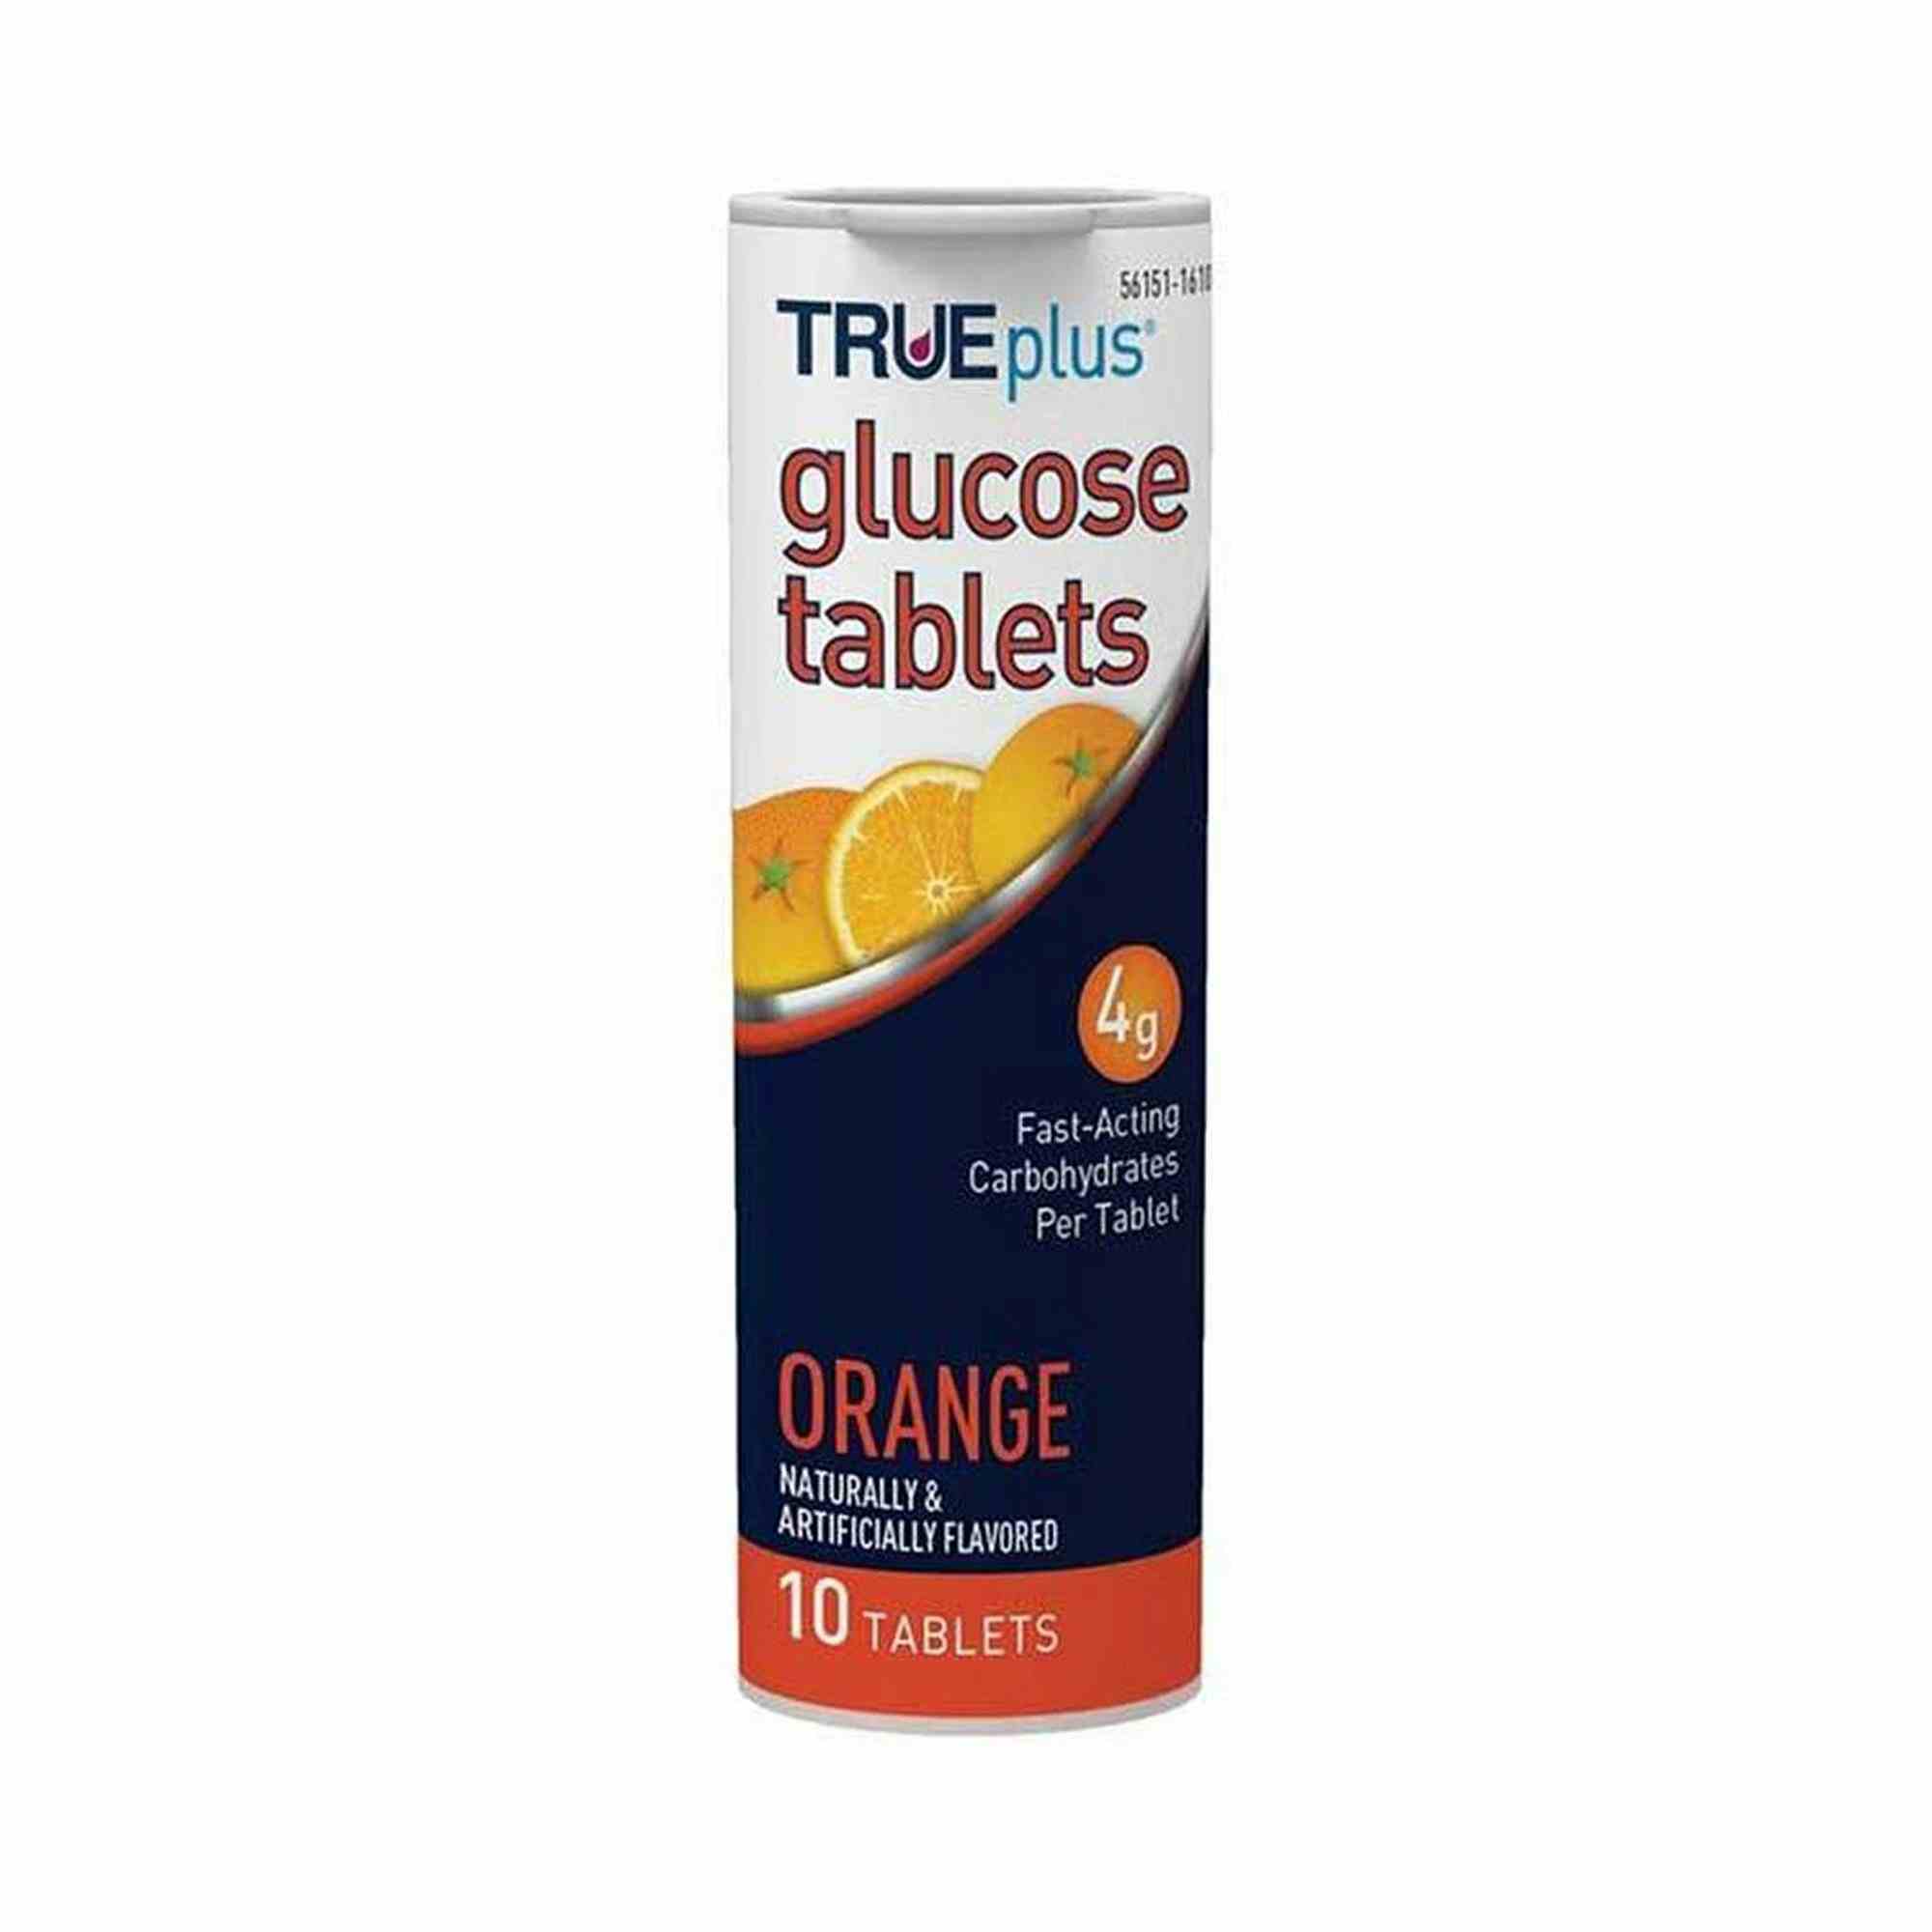 TRUEplus Chewable Glucose Tablets, Orange, 10 Tablets, P1H01RN-10, Pack of 6